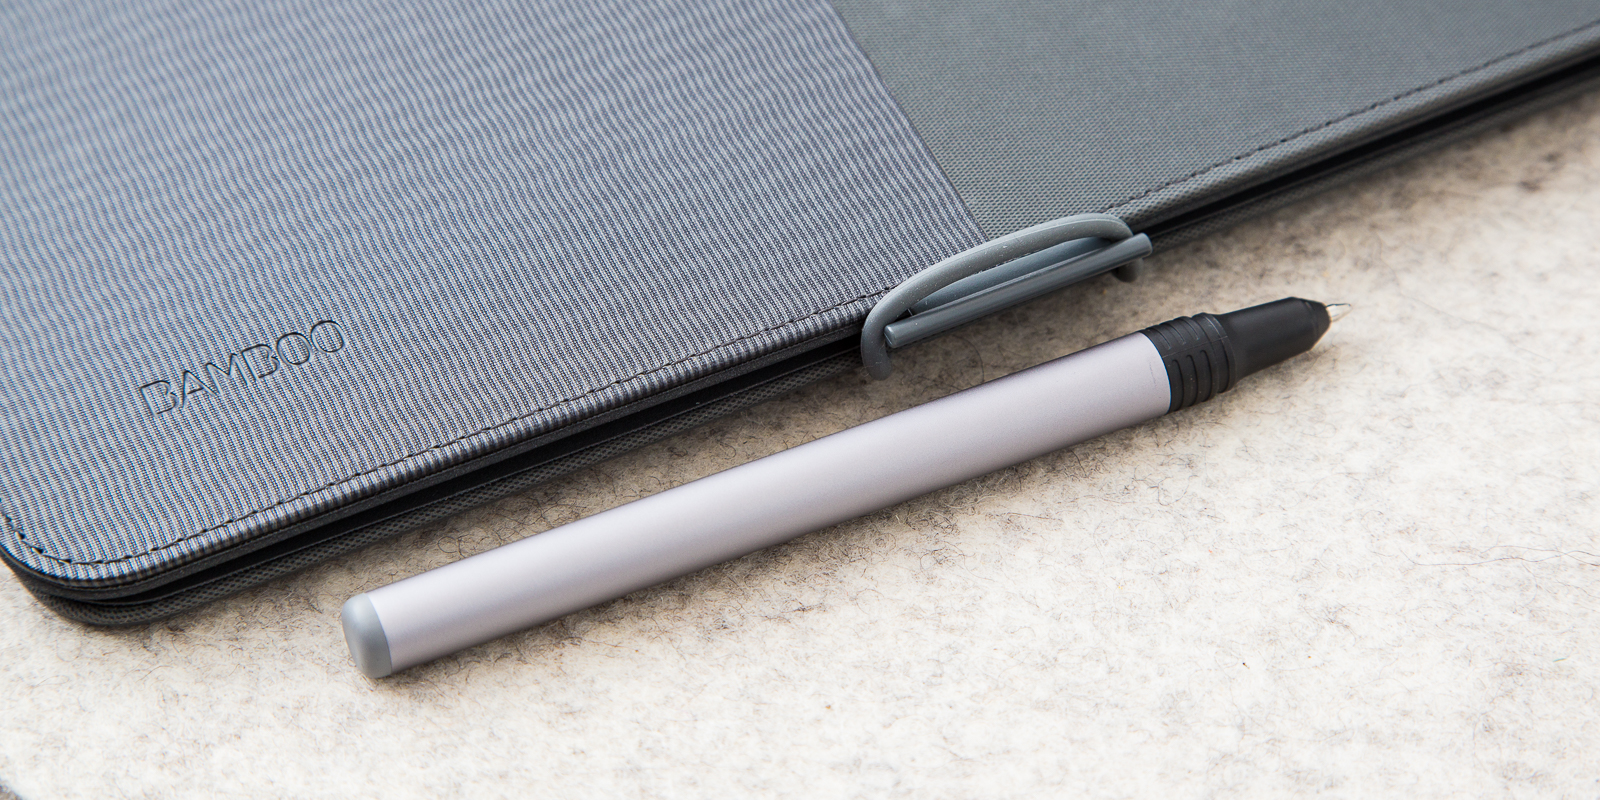 Wacom’s New Digitising Notebook Could Bring Me Back To Pen And Paper